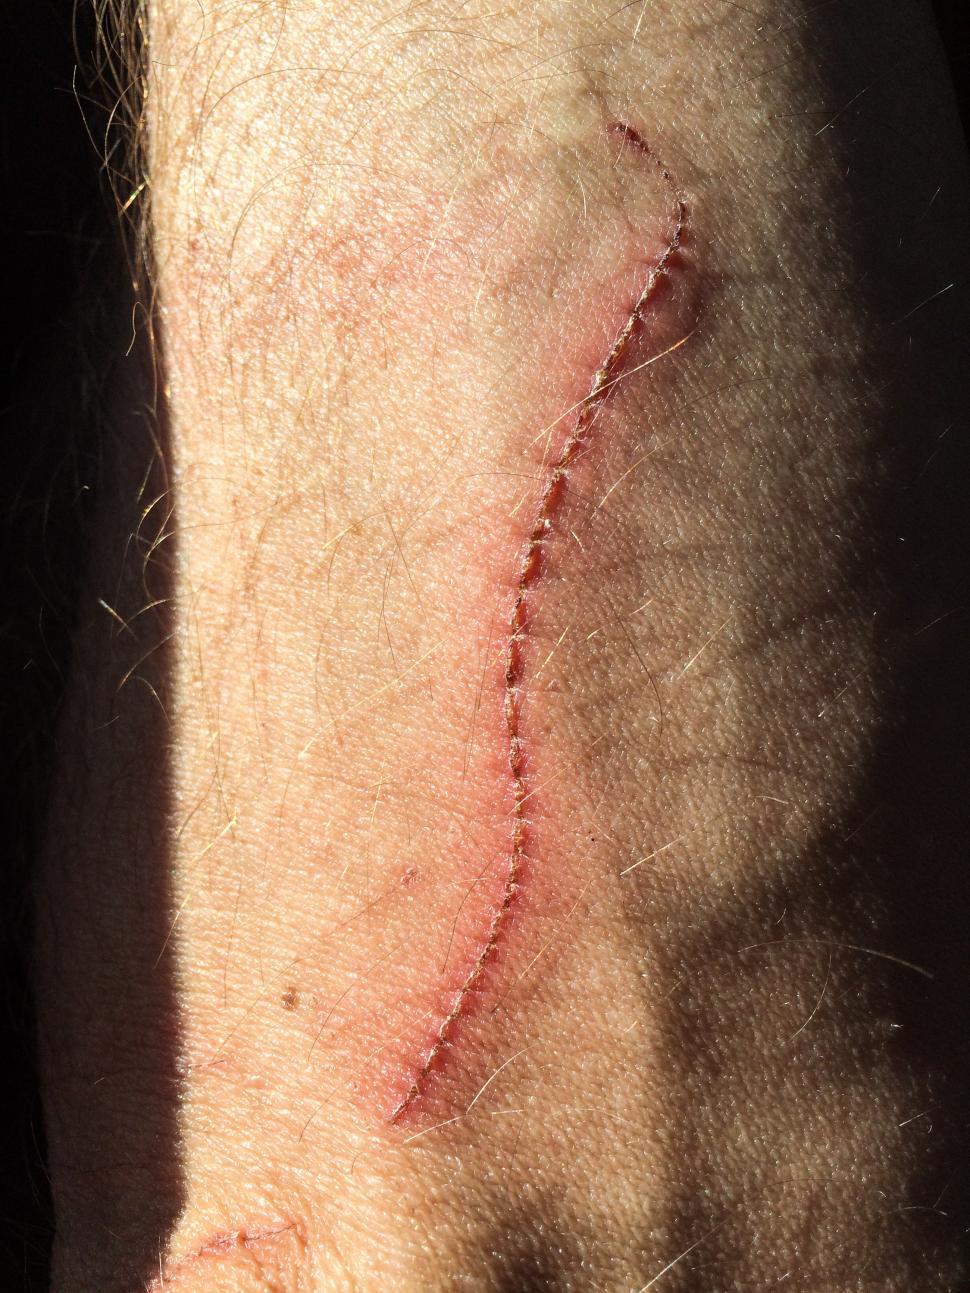 Free Image of Healing wound on arm 